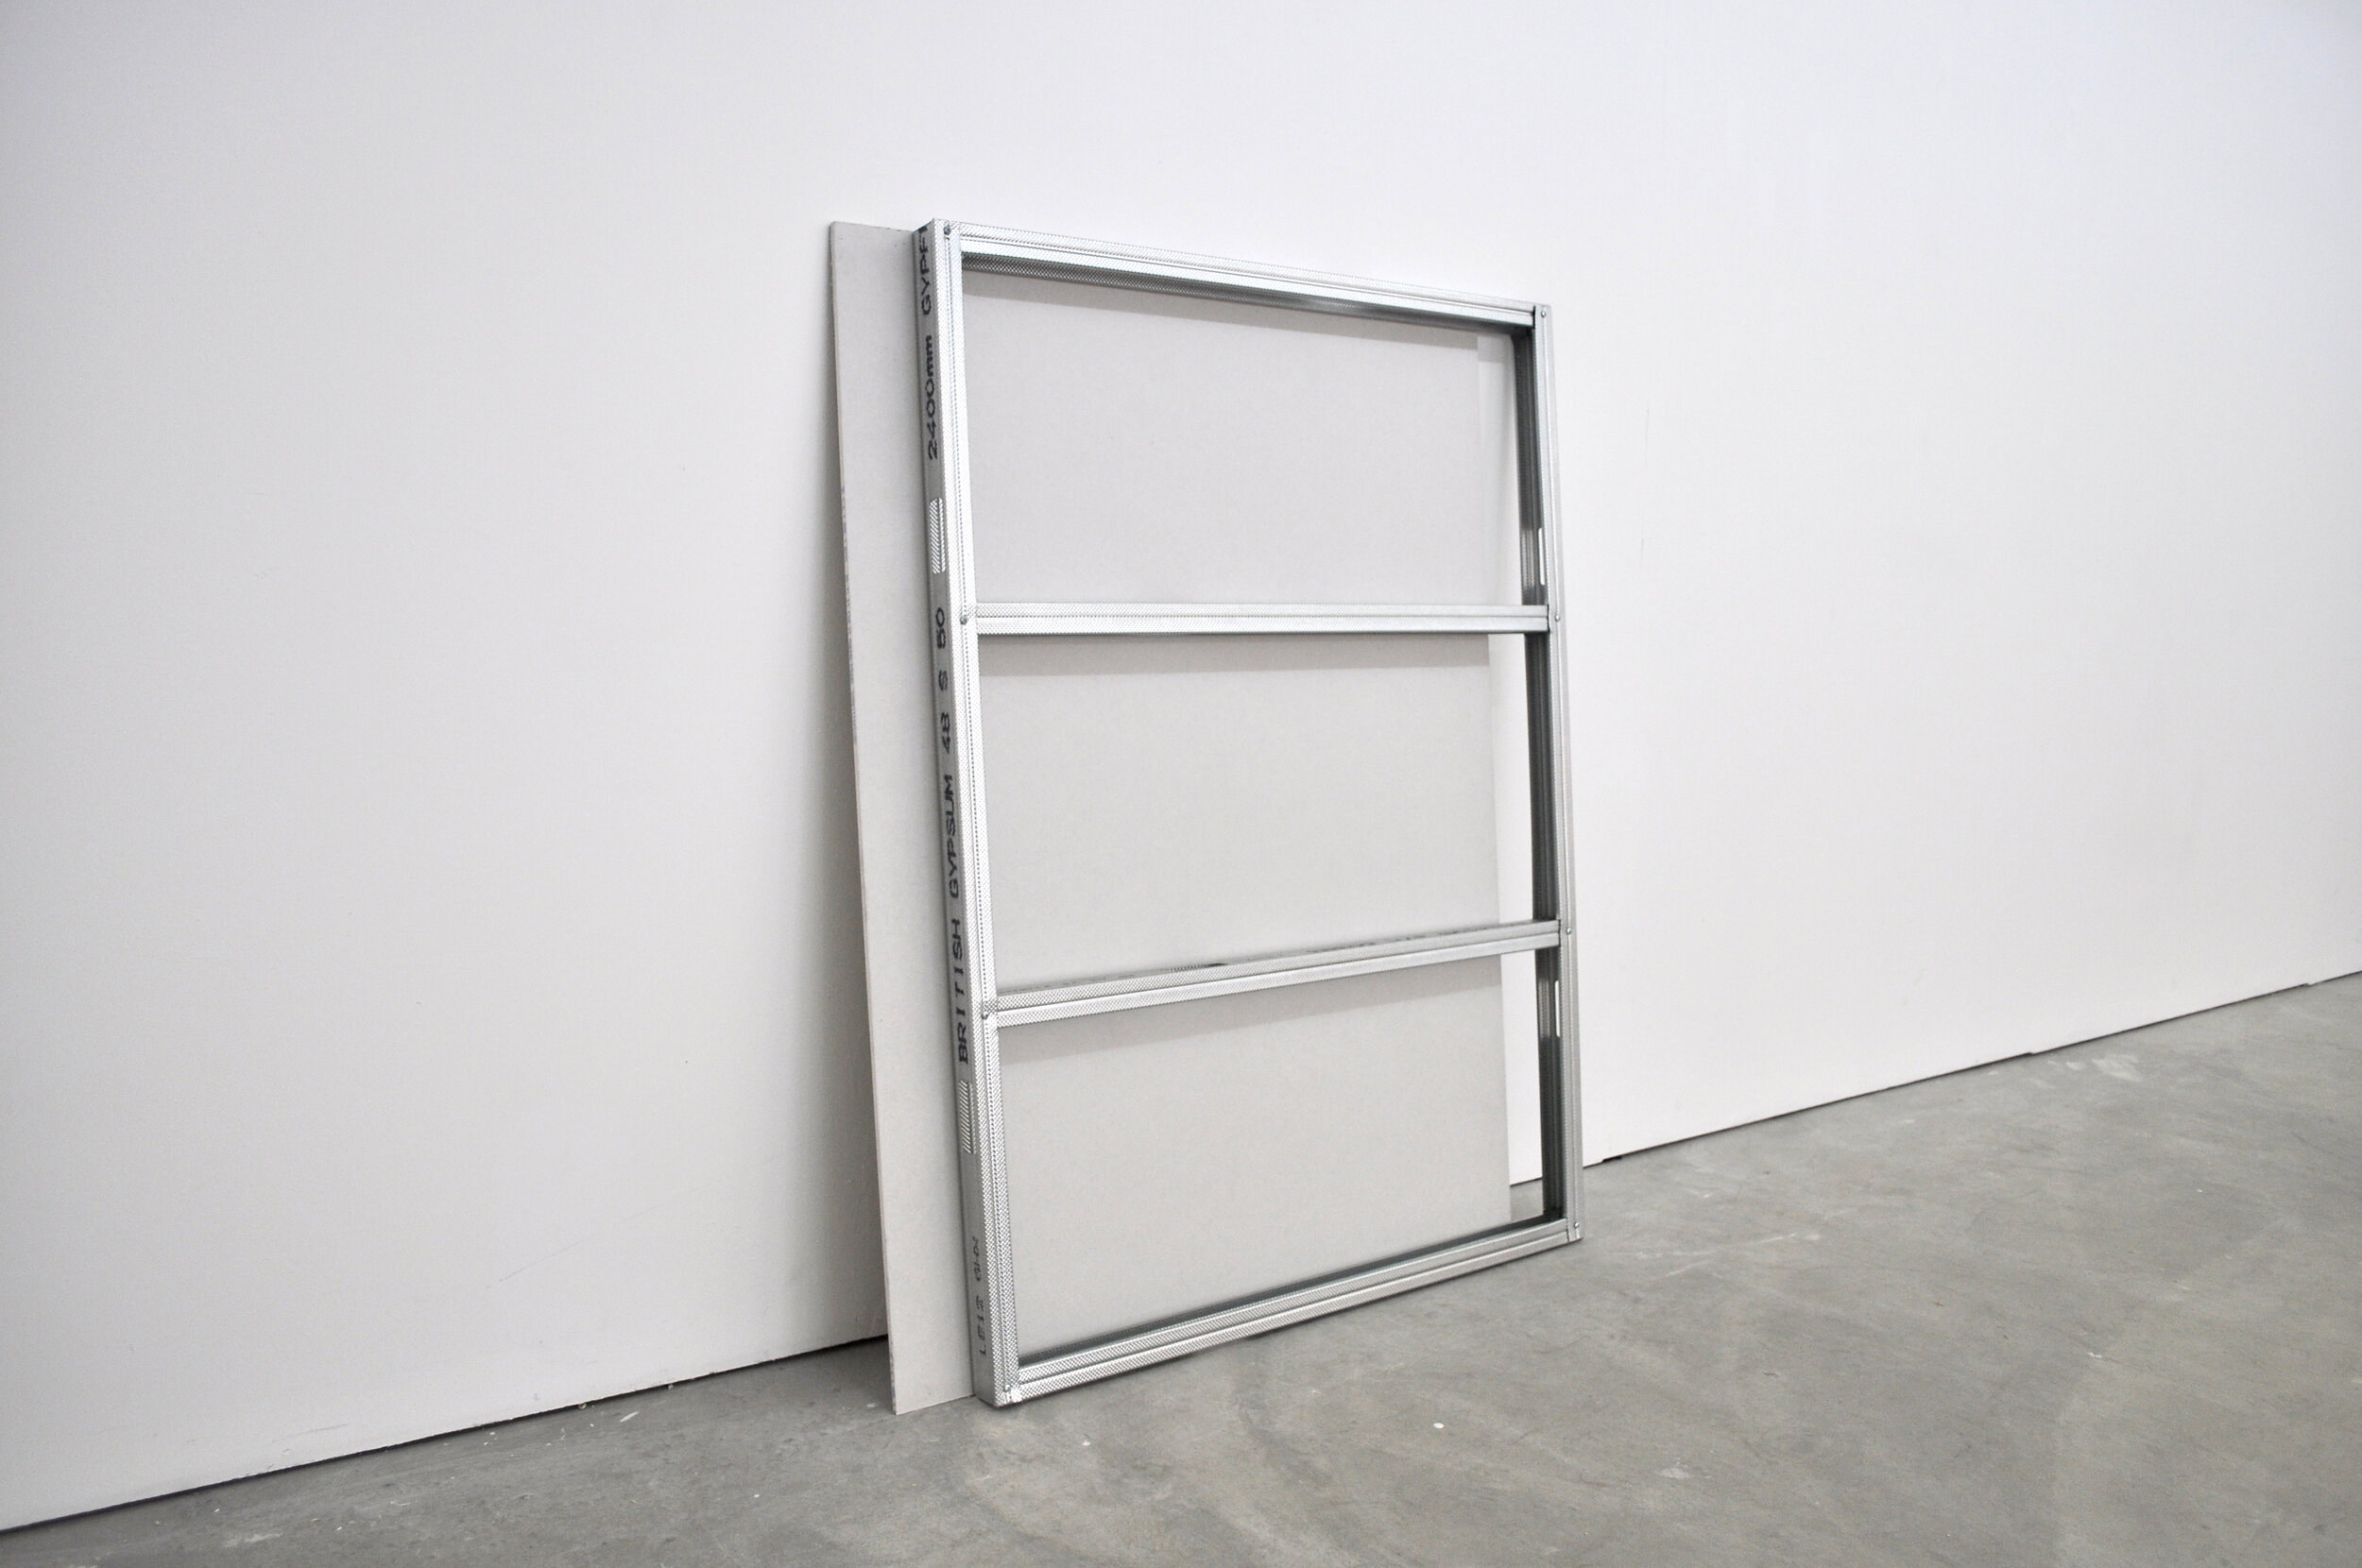   Untitled (small wall) , 2014, sheetrock and metal studs, 40”x24”. 